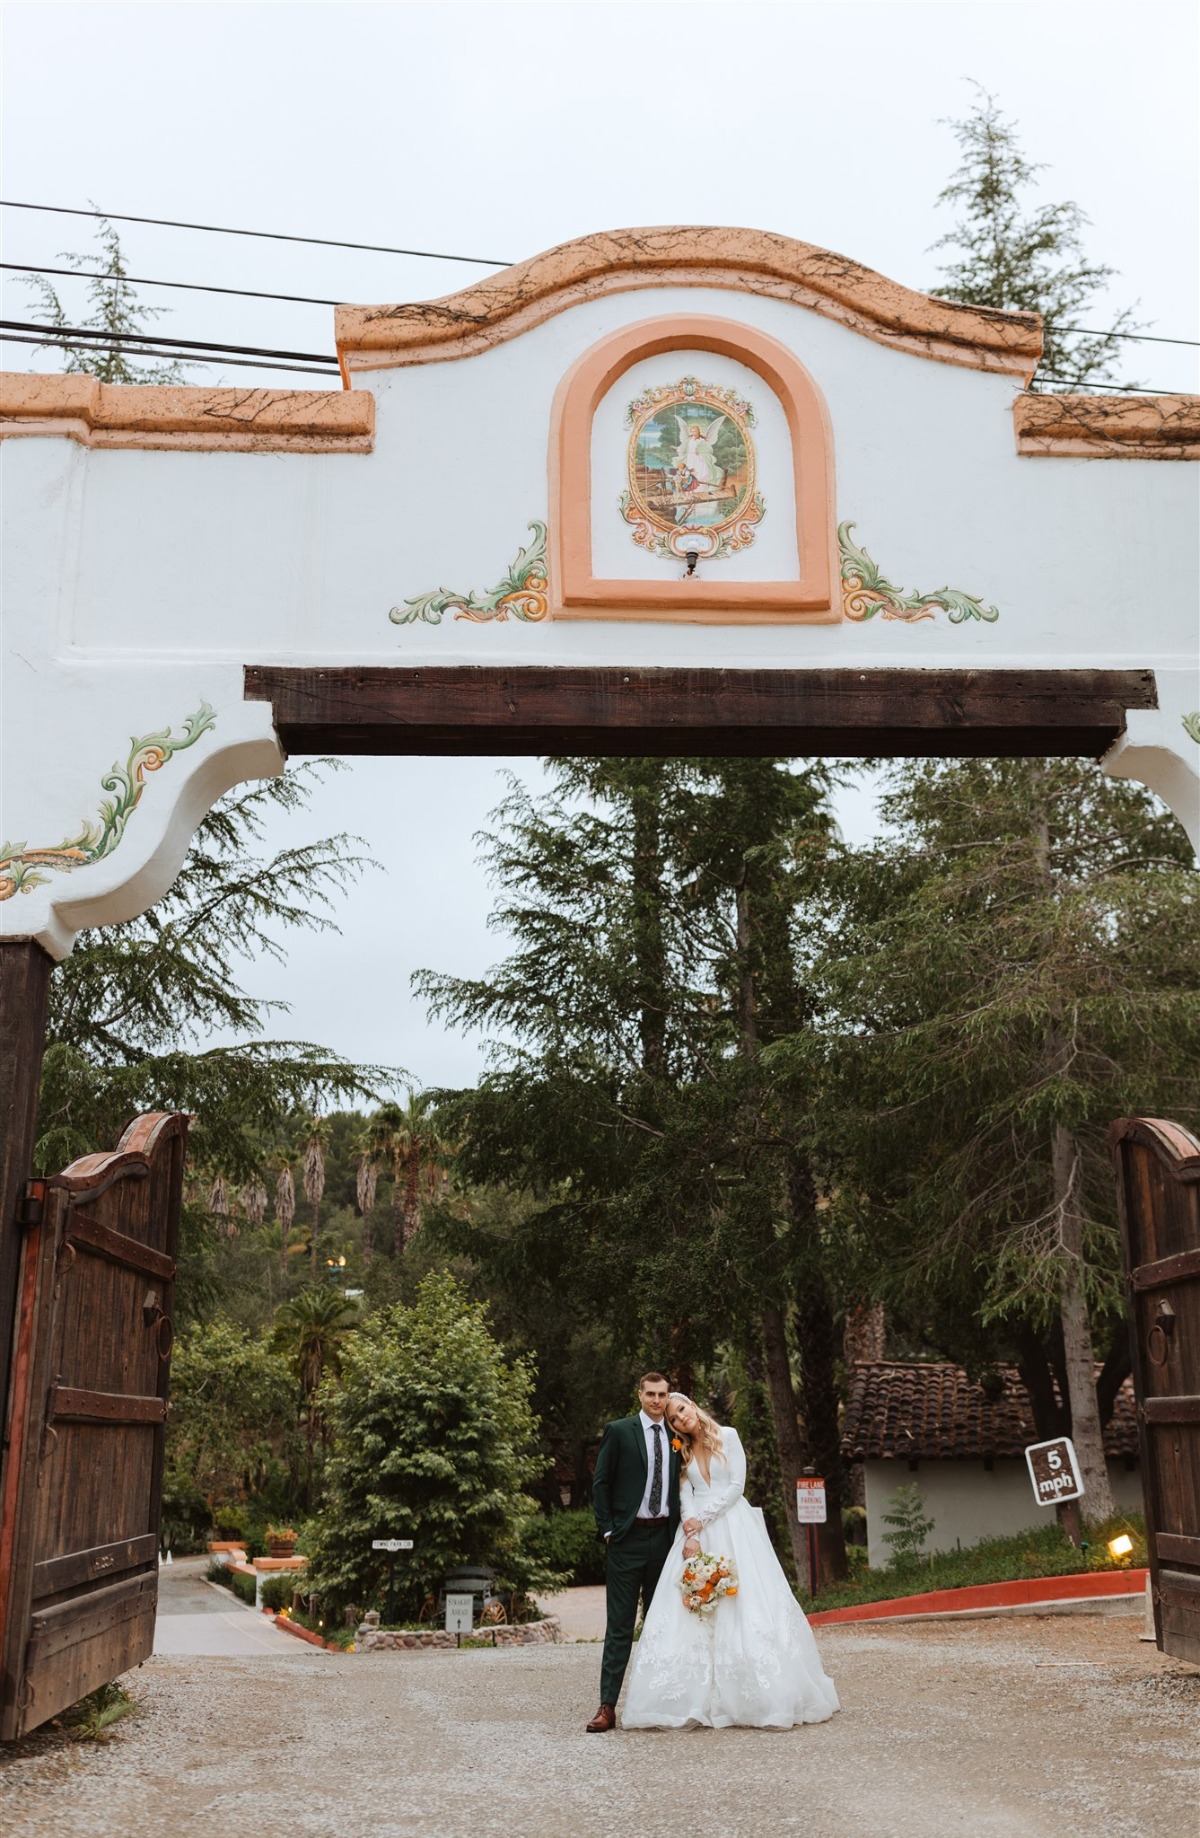 This couple said “I do” tucked away in the mountains of California